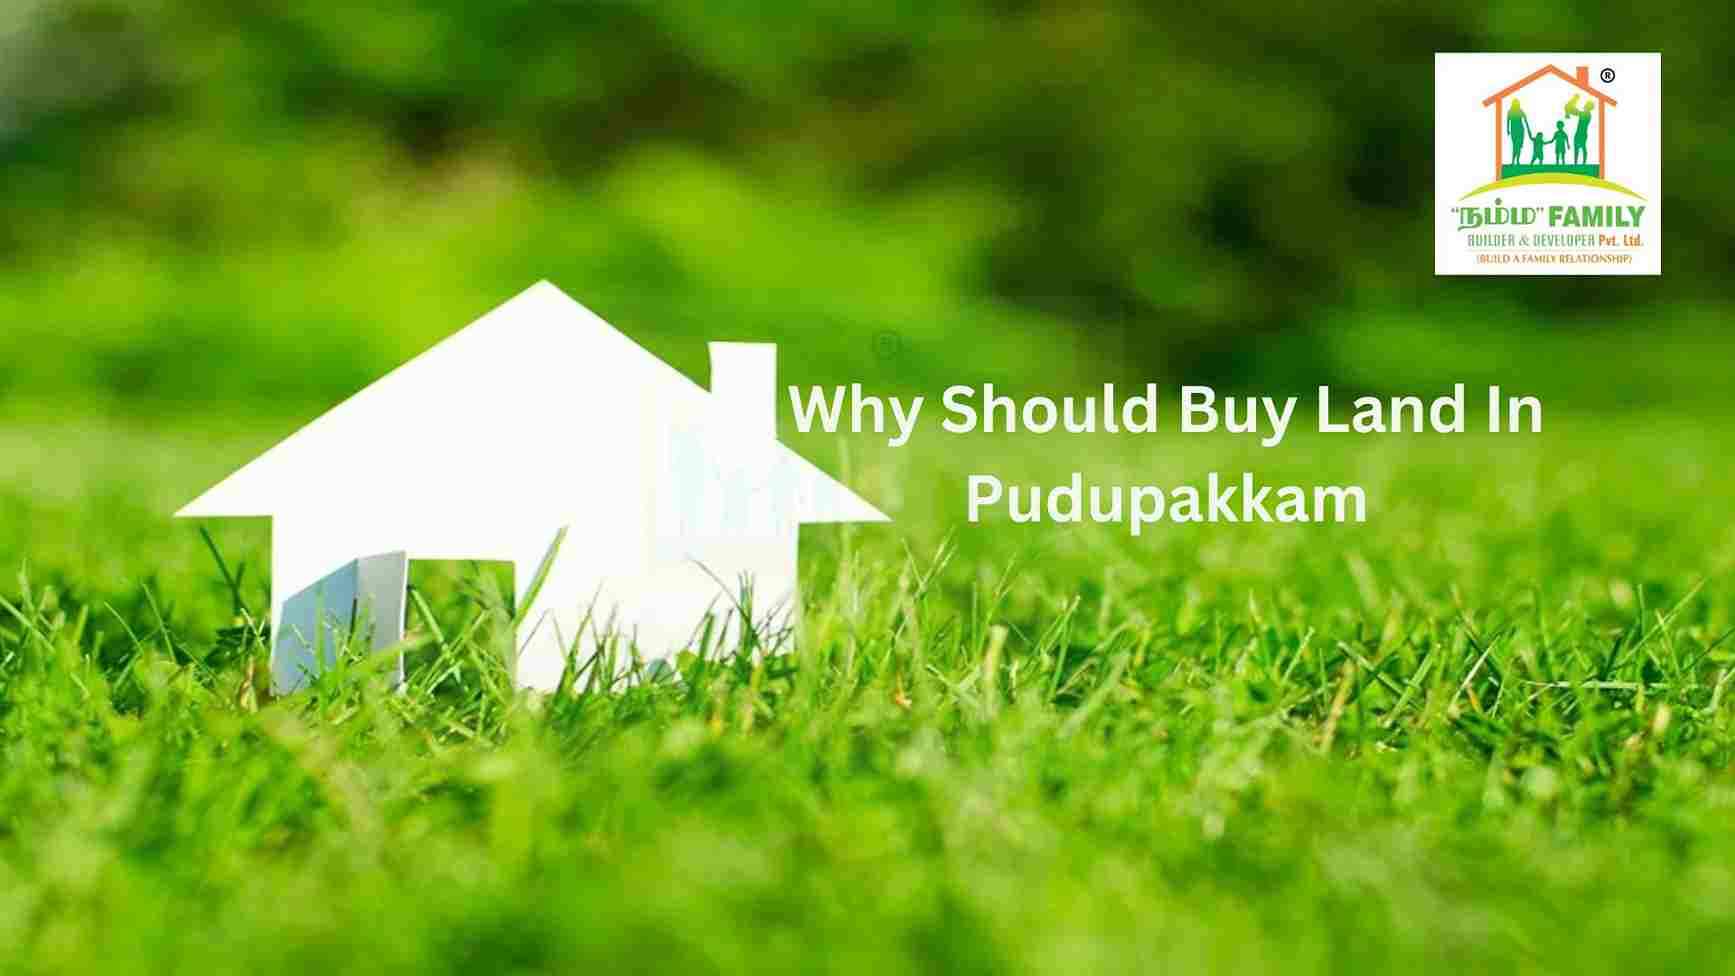 Why Should Buy Land In Pudupakkam - Namma Family Builder